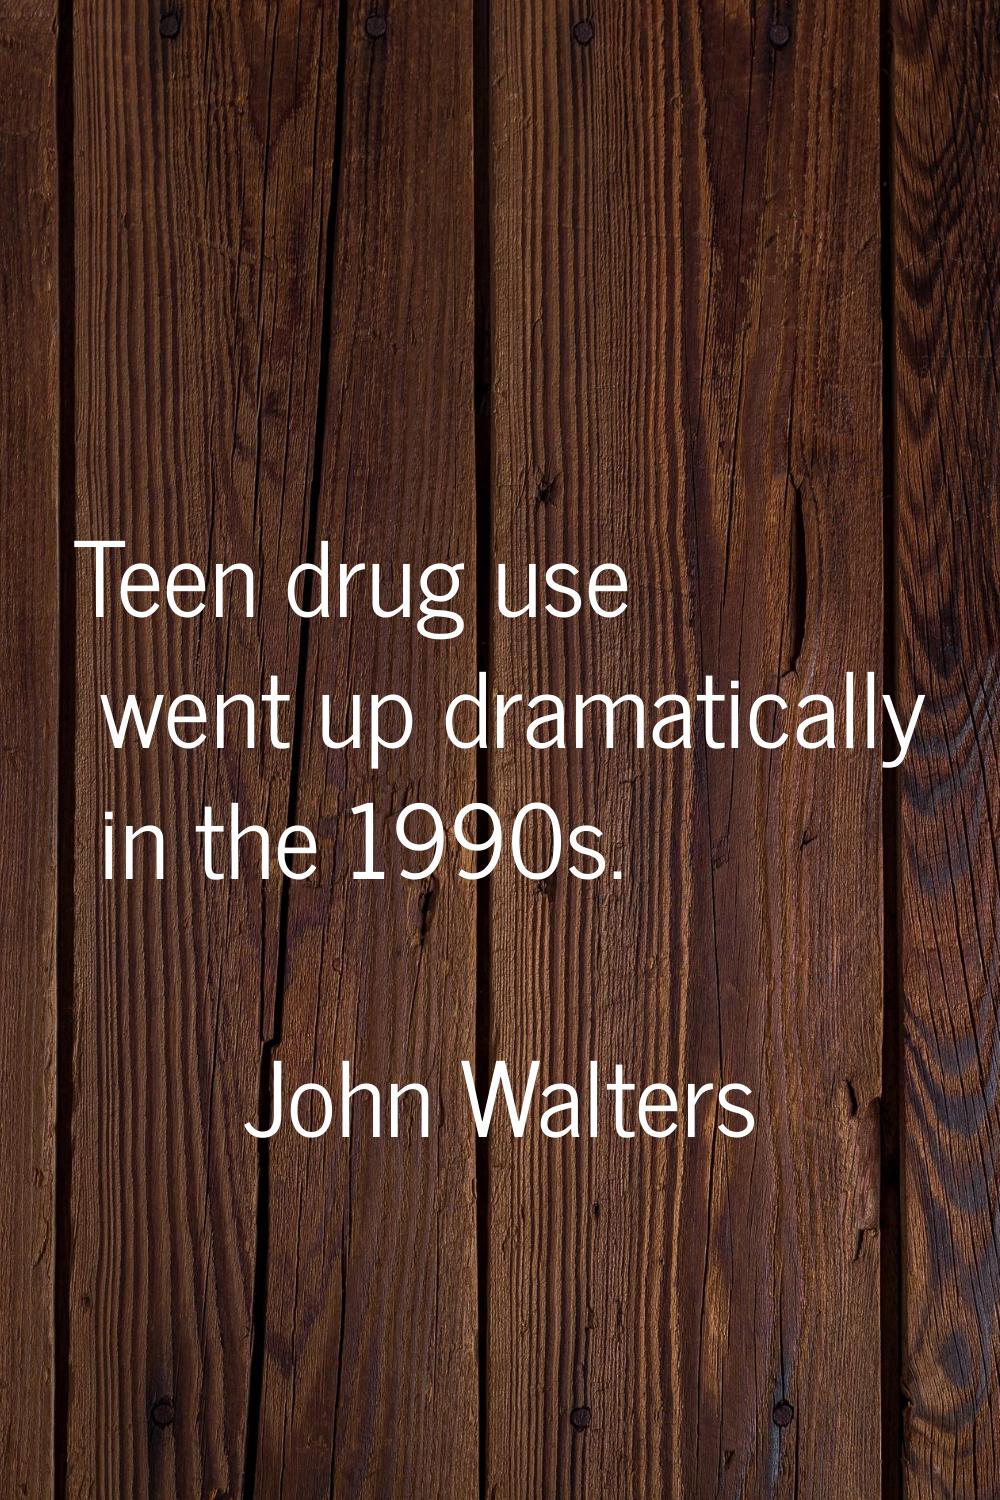 Teen drug use went up dramatically in the 1990s.